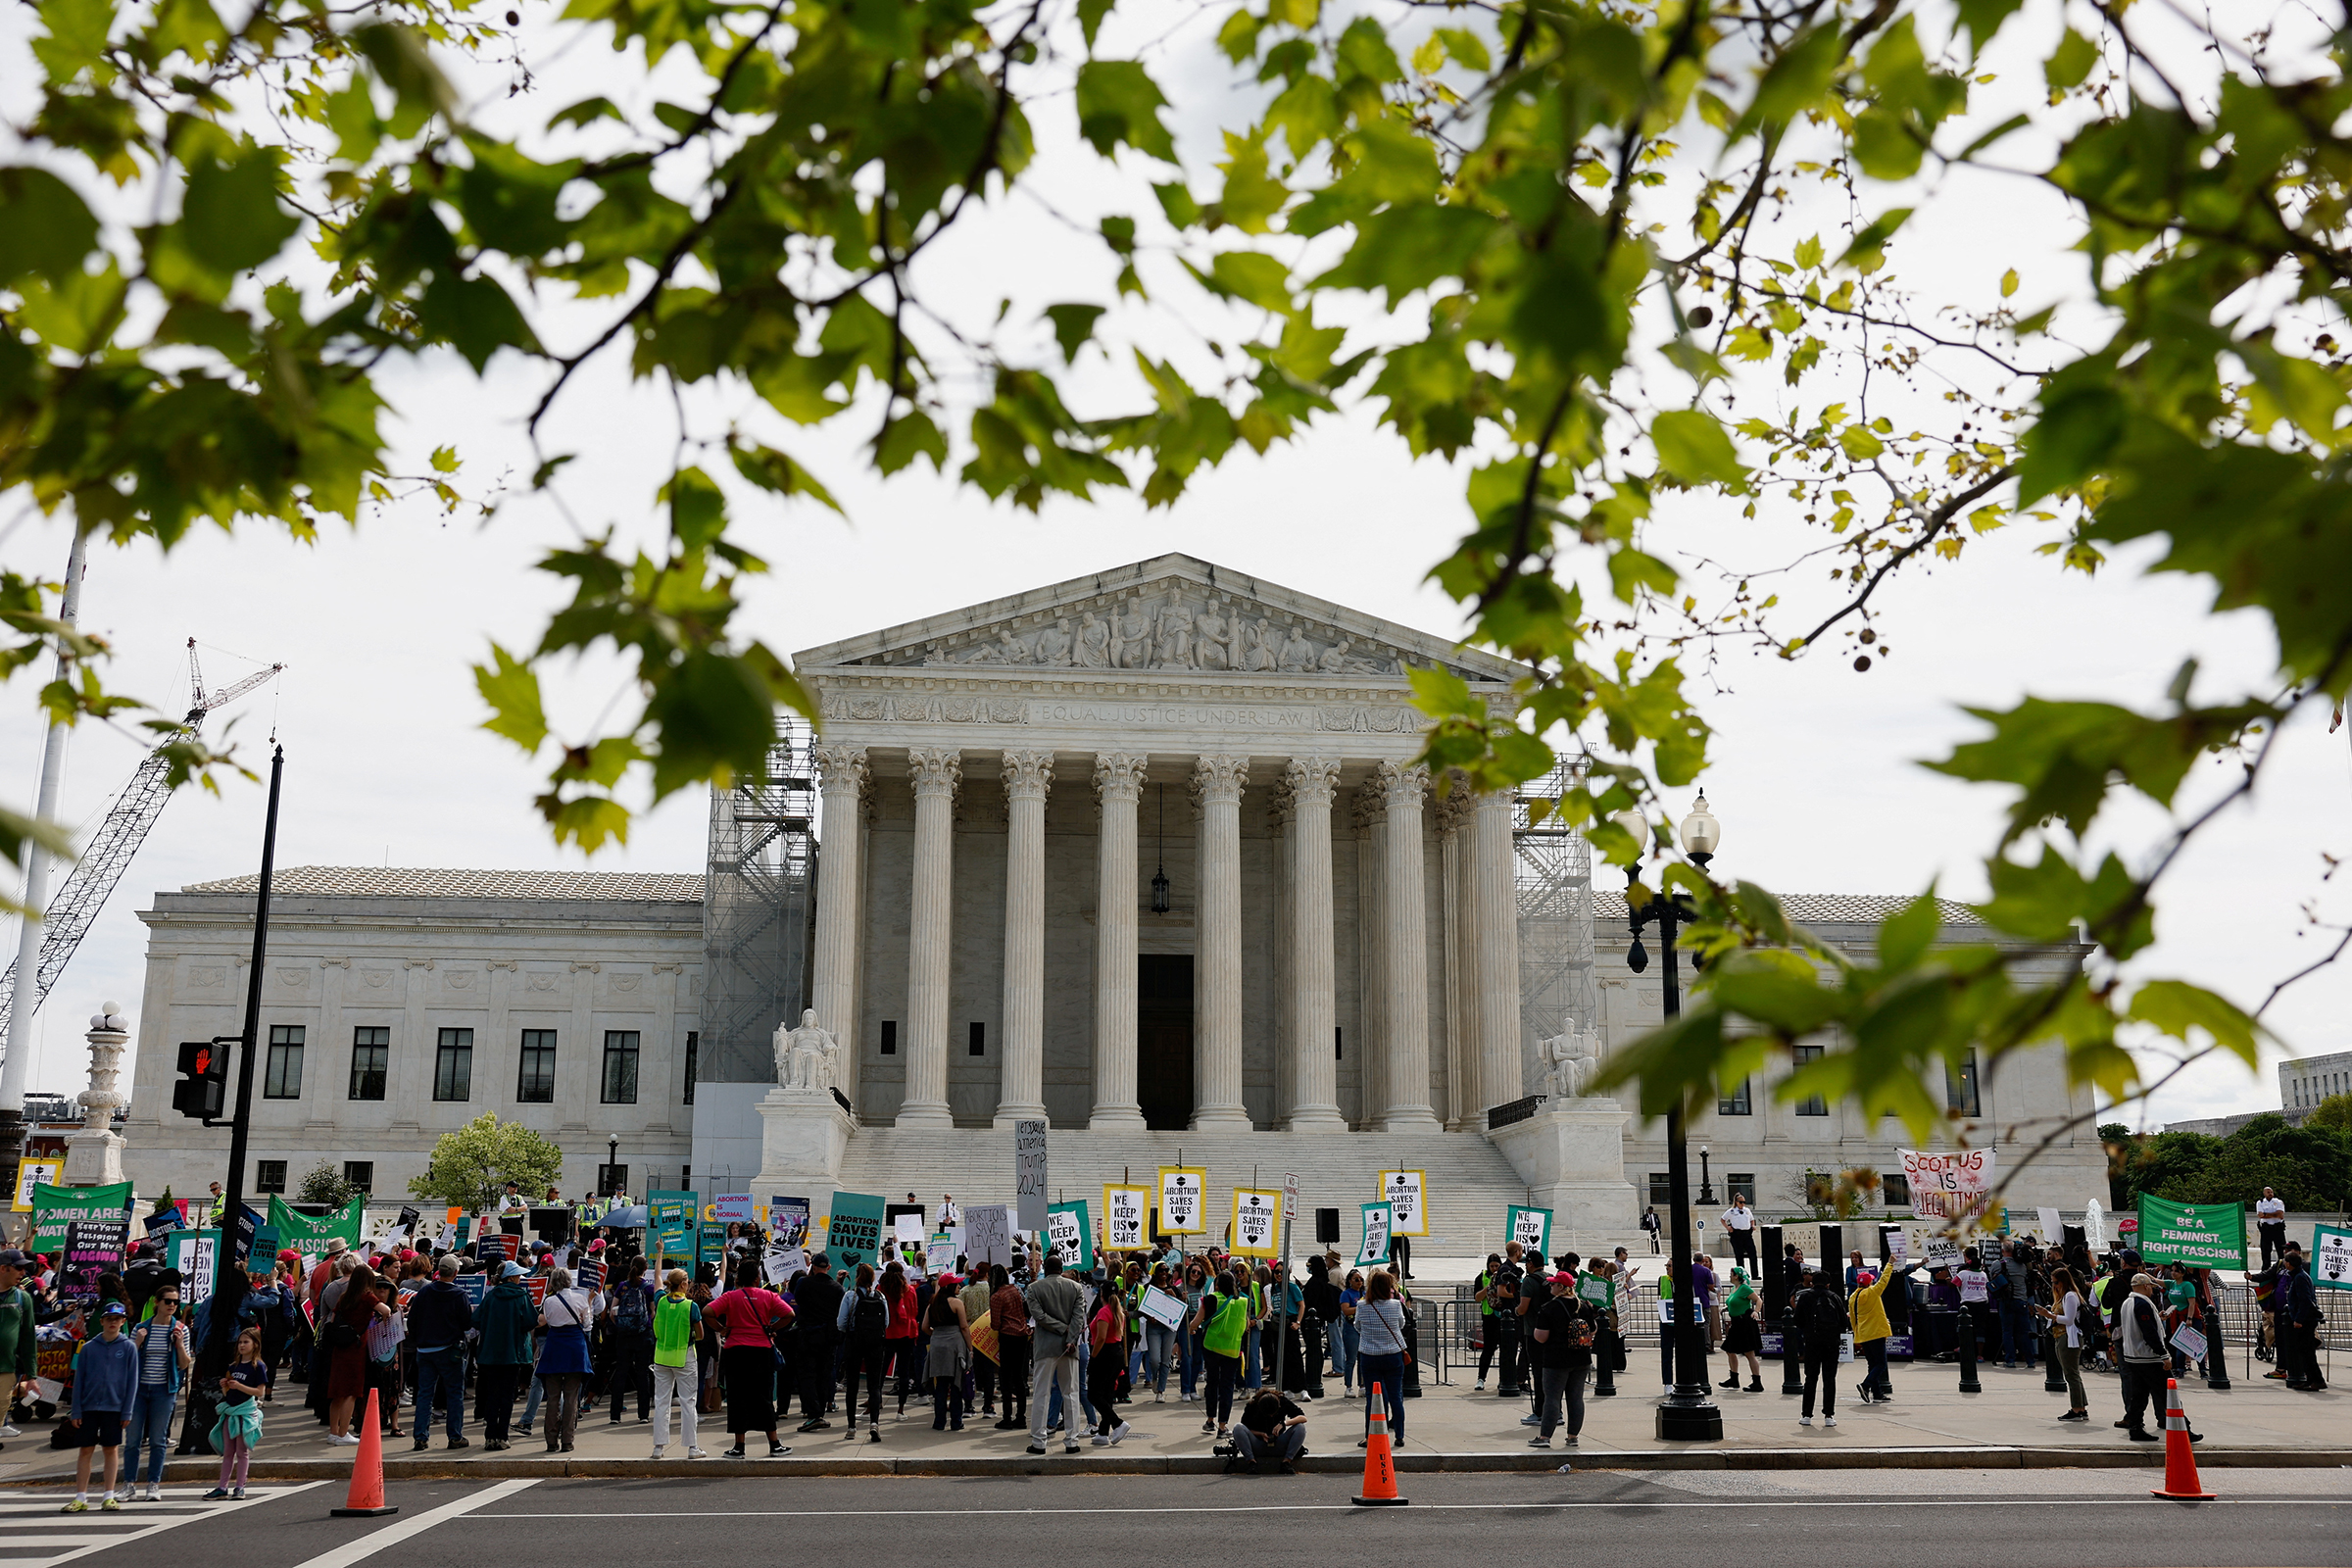 People gather during a protest in support of reproductive rights and emergency abortion care on the day the Supreme Court justices hear oral arguments over the legality of Idaho's Republican-backed, near-total abortion ban in medical-emergency situations, in Washington, DC, on April 24.